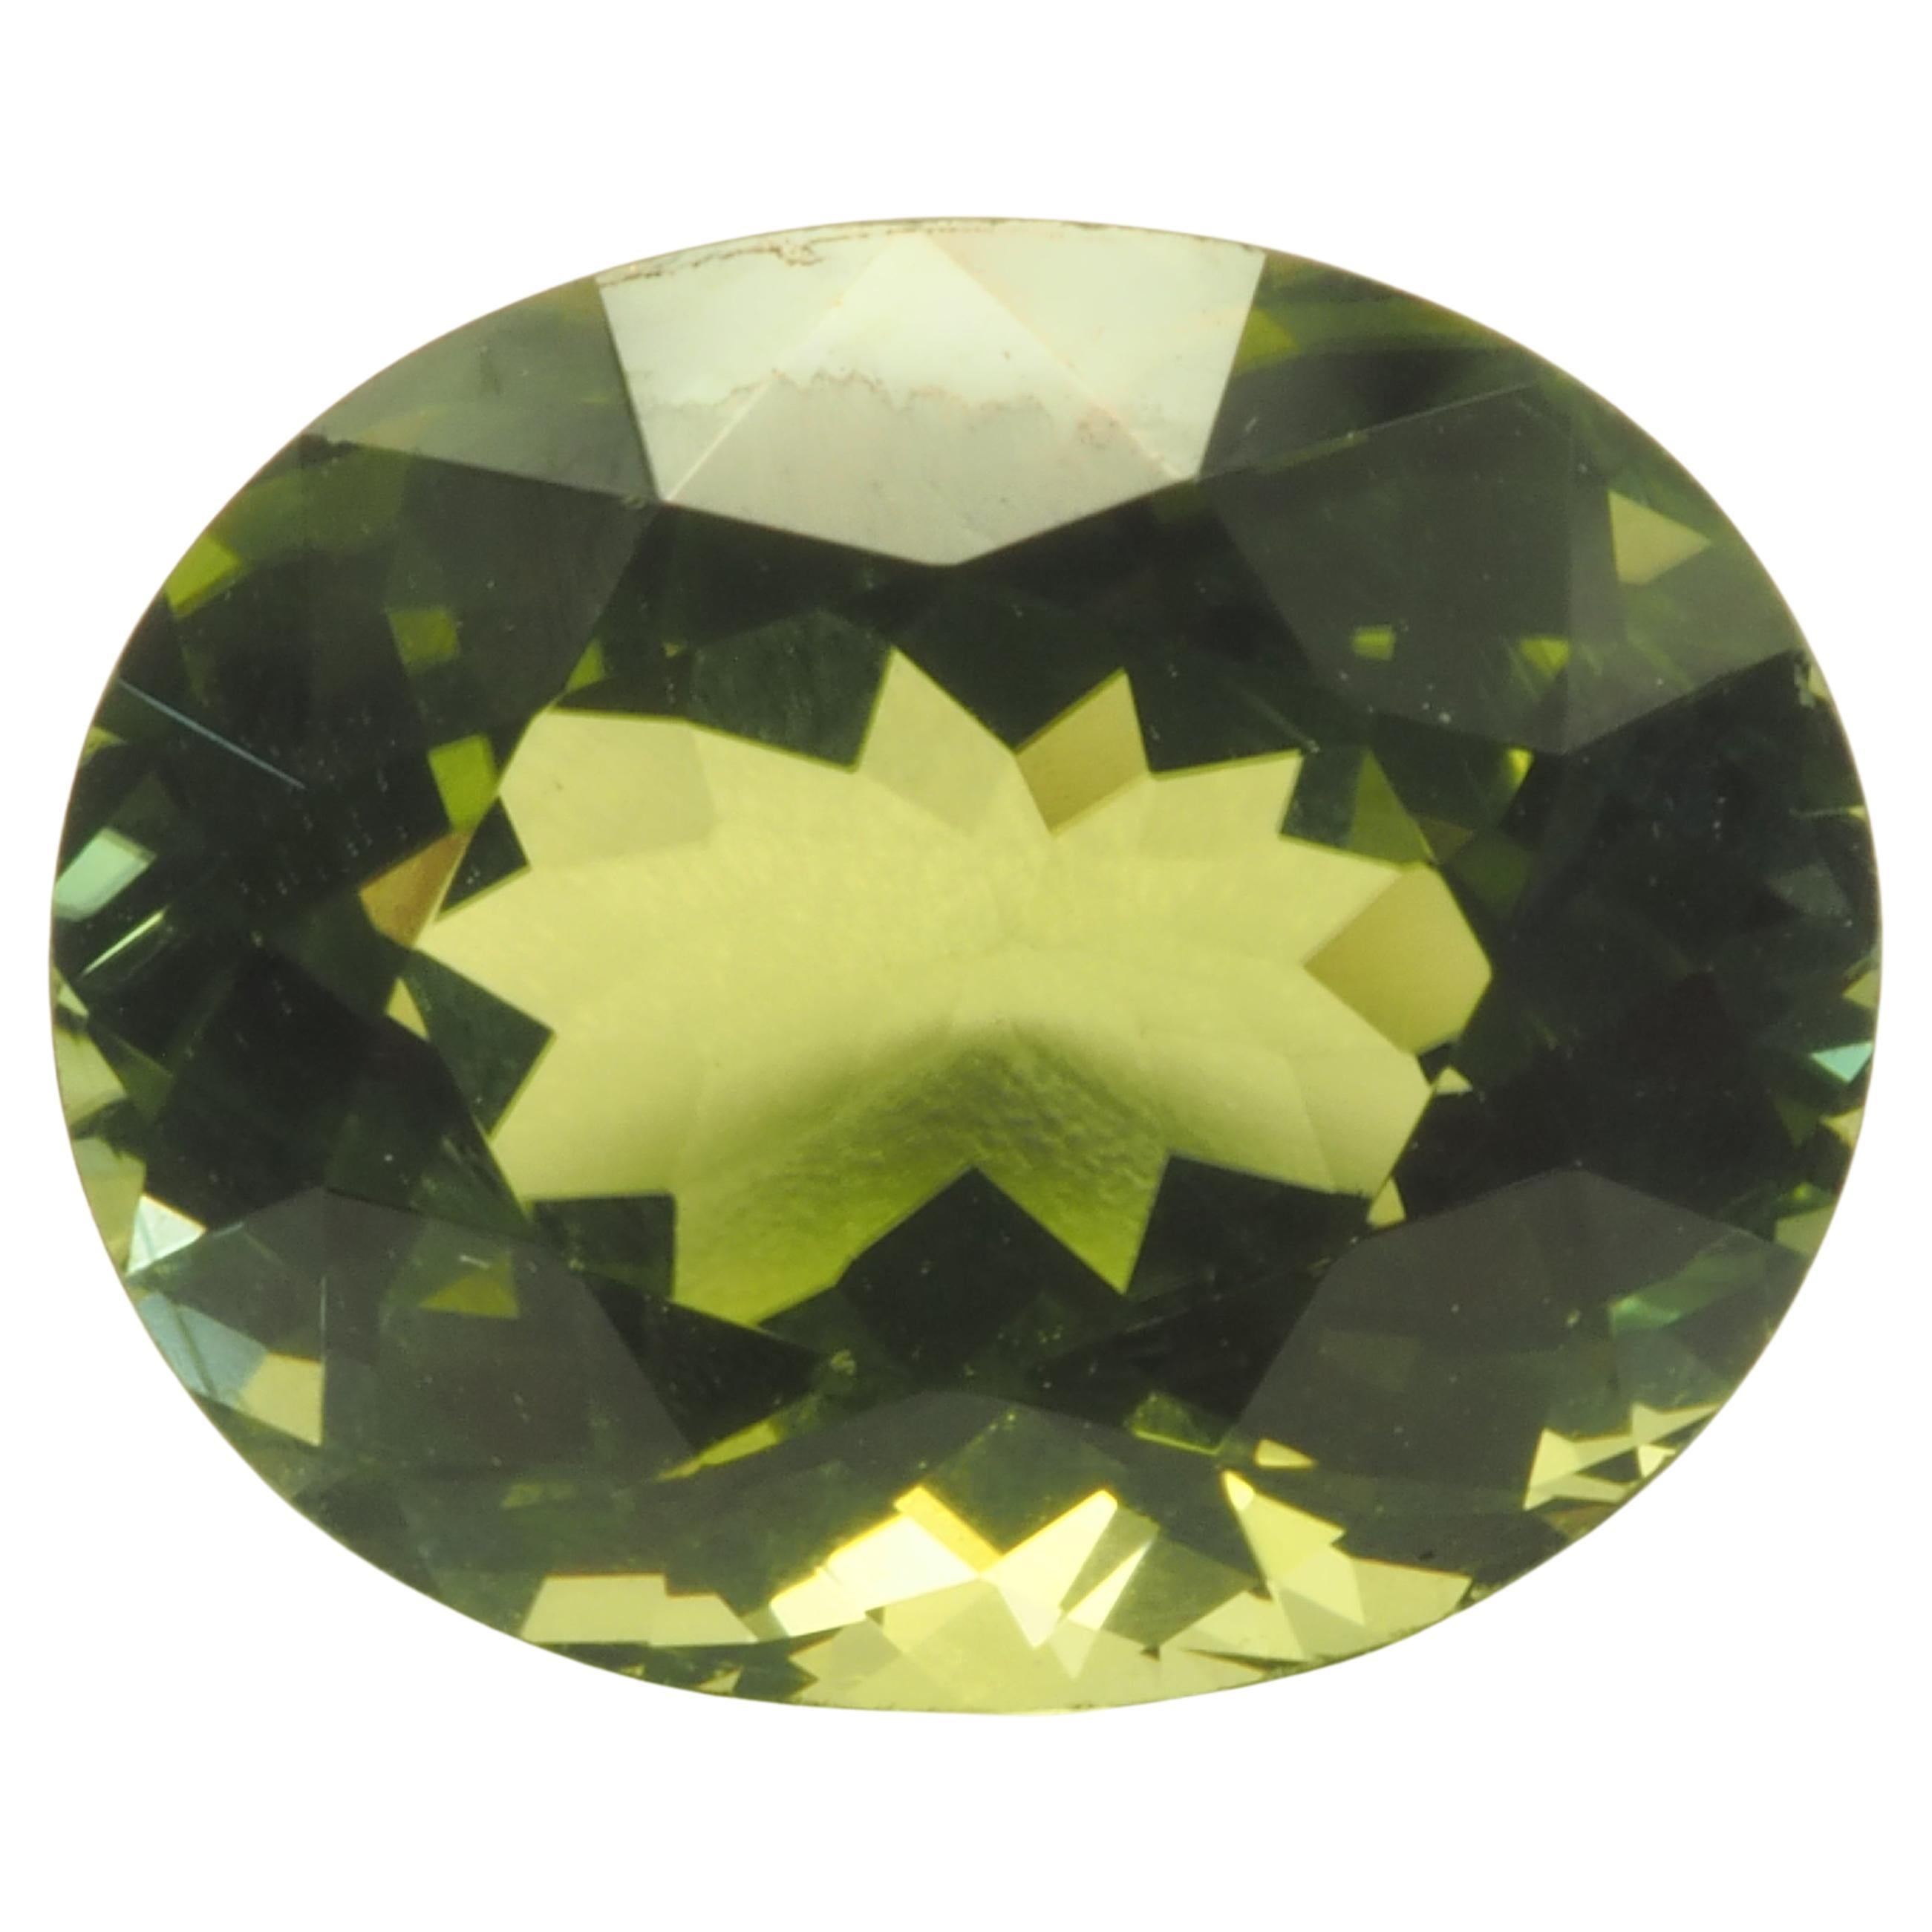 GIT Certified 4.37ct Oval Olive Green Tourmaline, Eye Clean, 11.13x9.12x6.59 mm For Sale